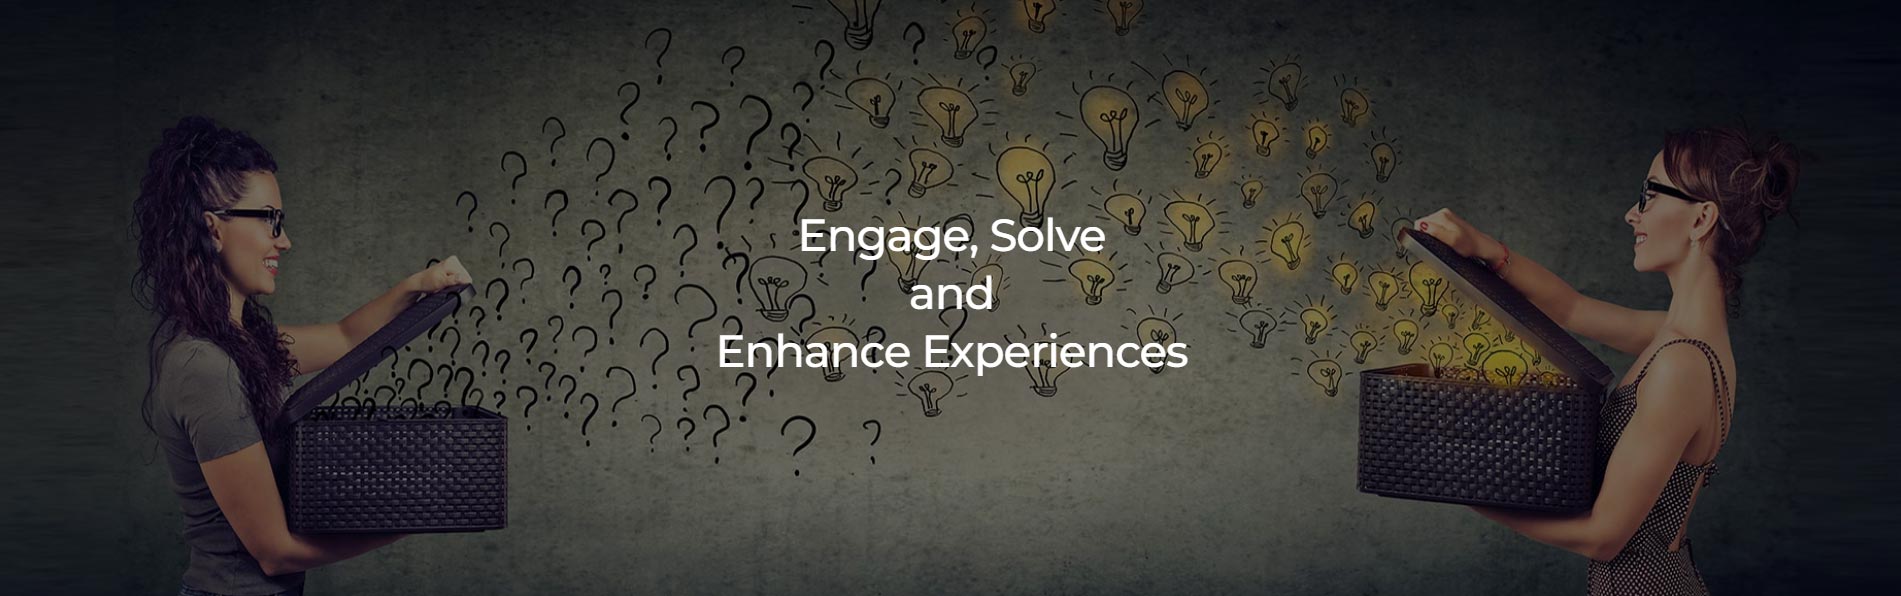 Engage Solve and Enhance Experiences